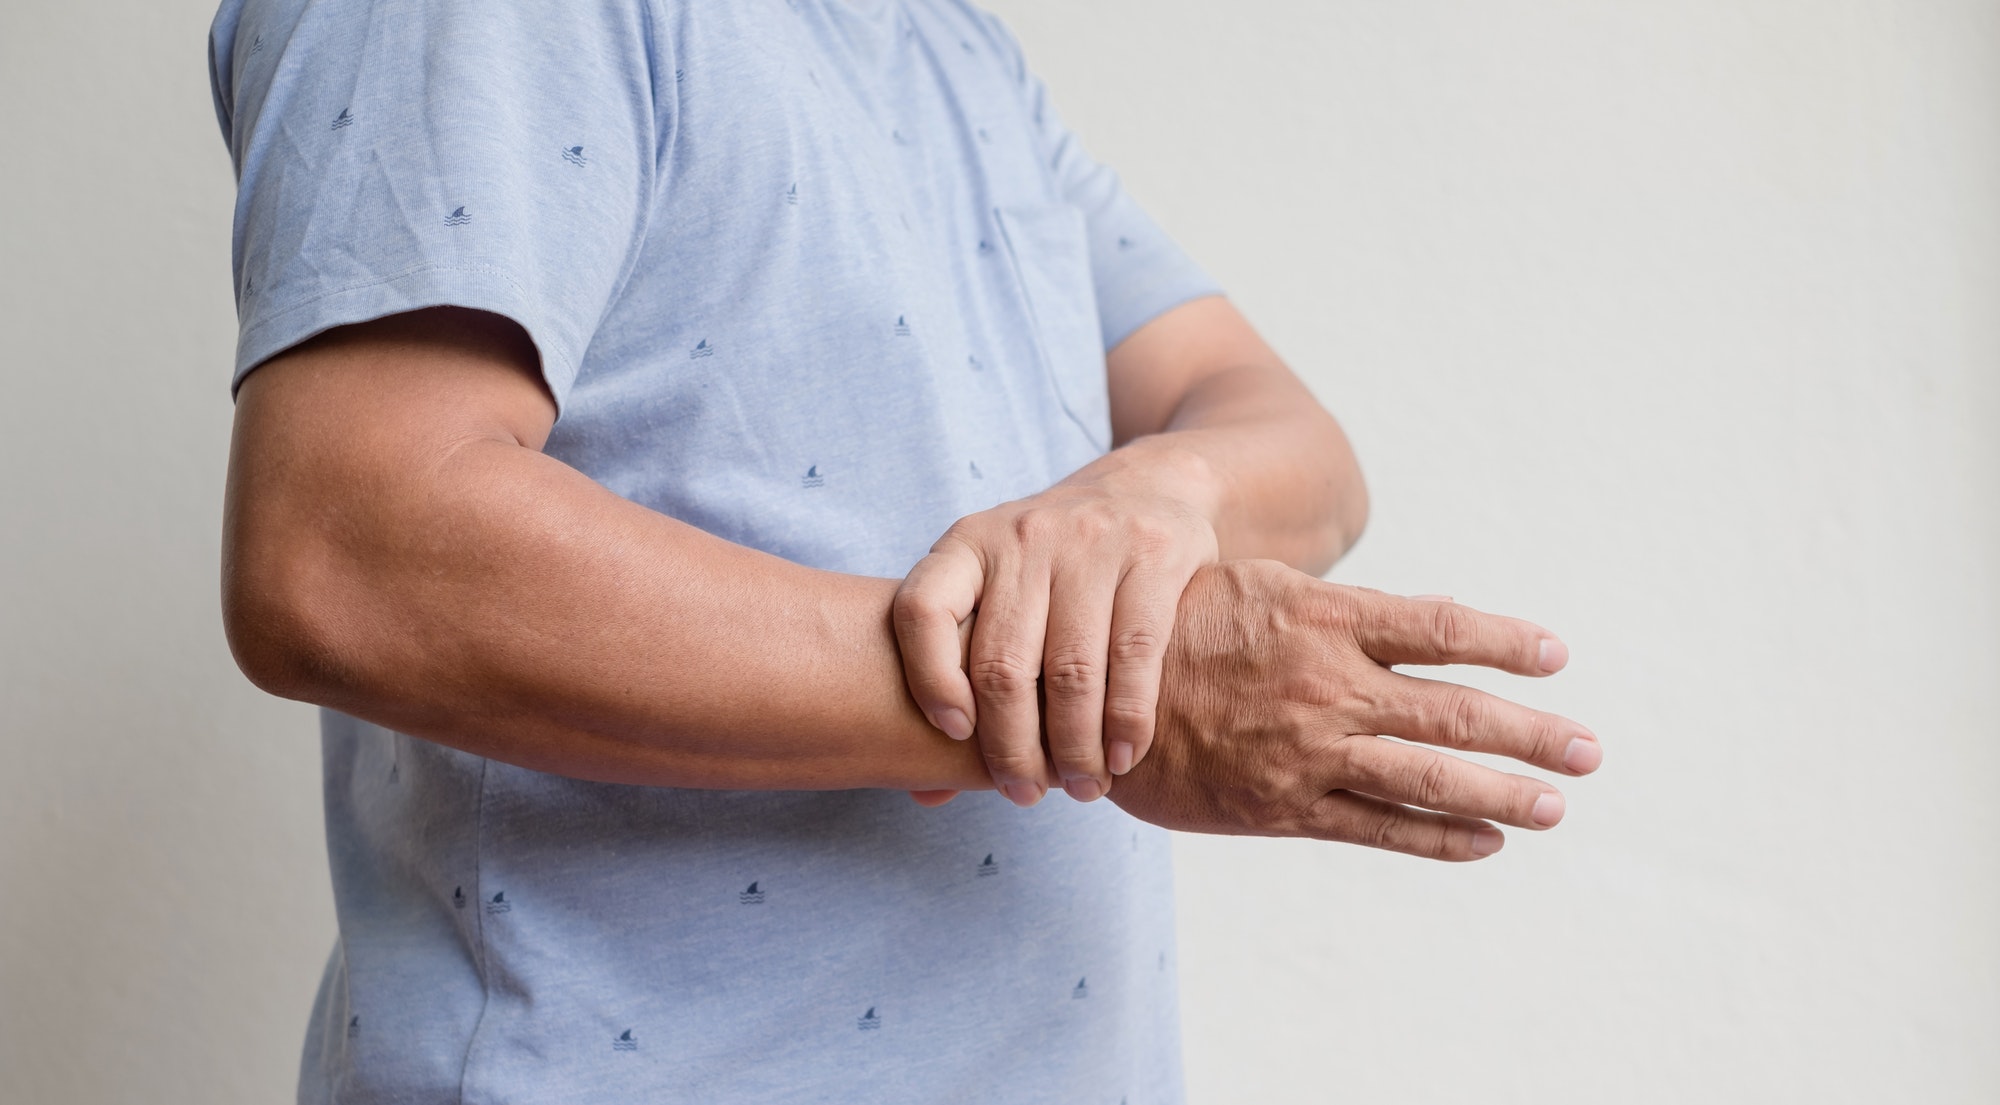 Pain Outside Of Wrist | The Causes And Treatment Options